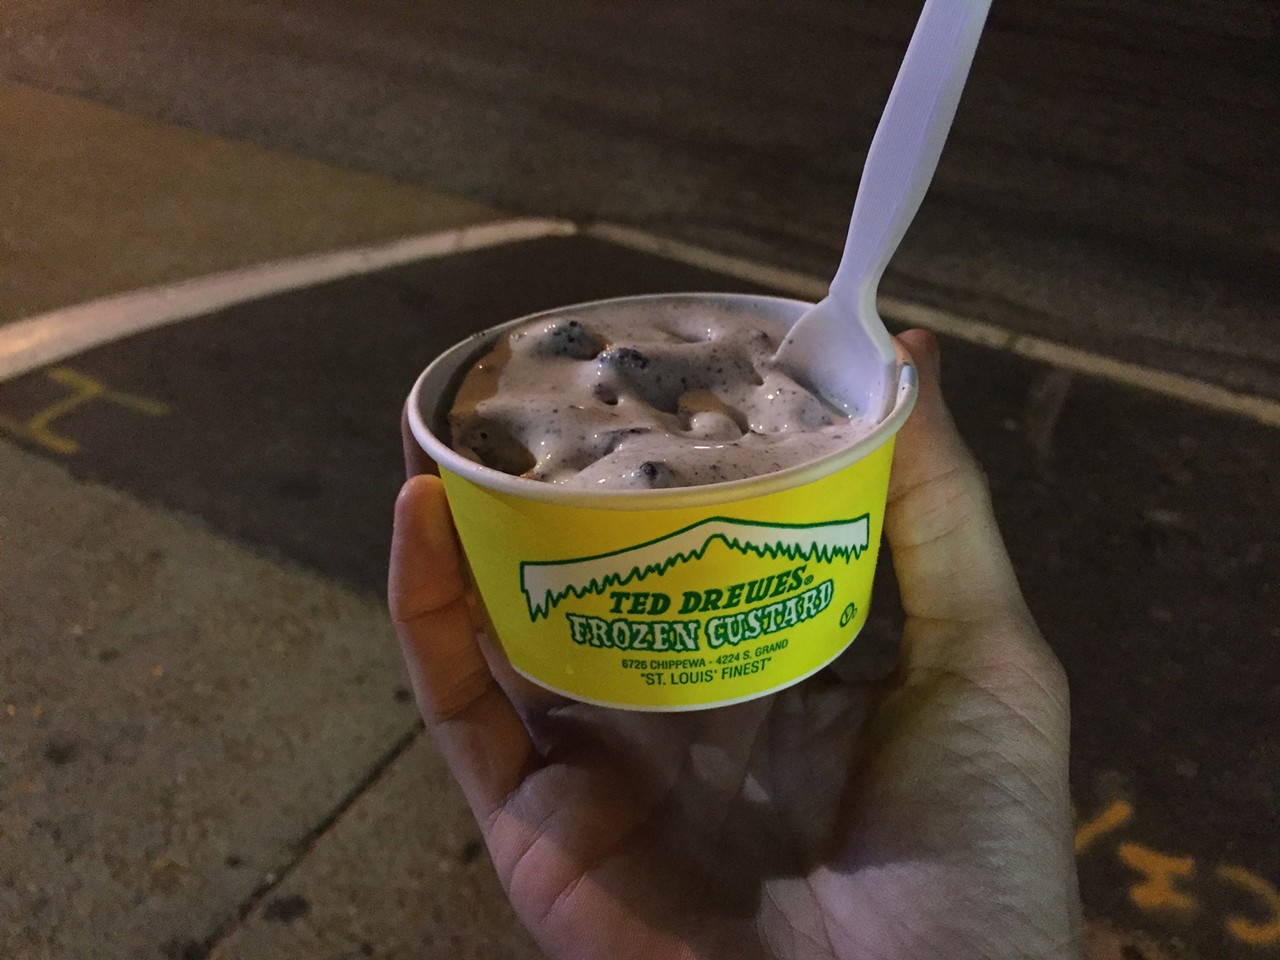 Ted Drewes
(multiple locations including 6726 Chippewa Street, TedDrewes.com)
Don’t forget to take pictures of your kids and their frozen custard-covered faces at this historic St. Louis spot.